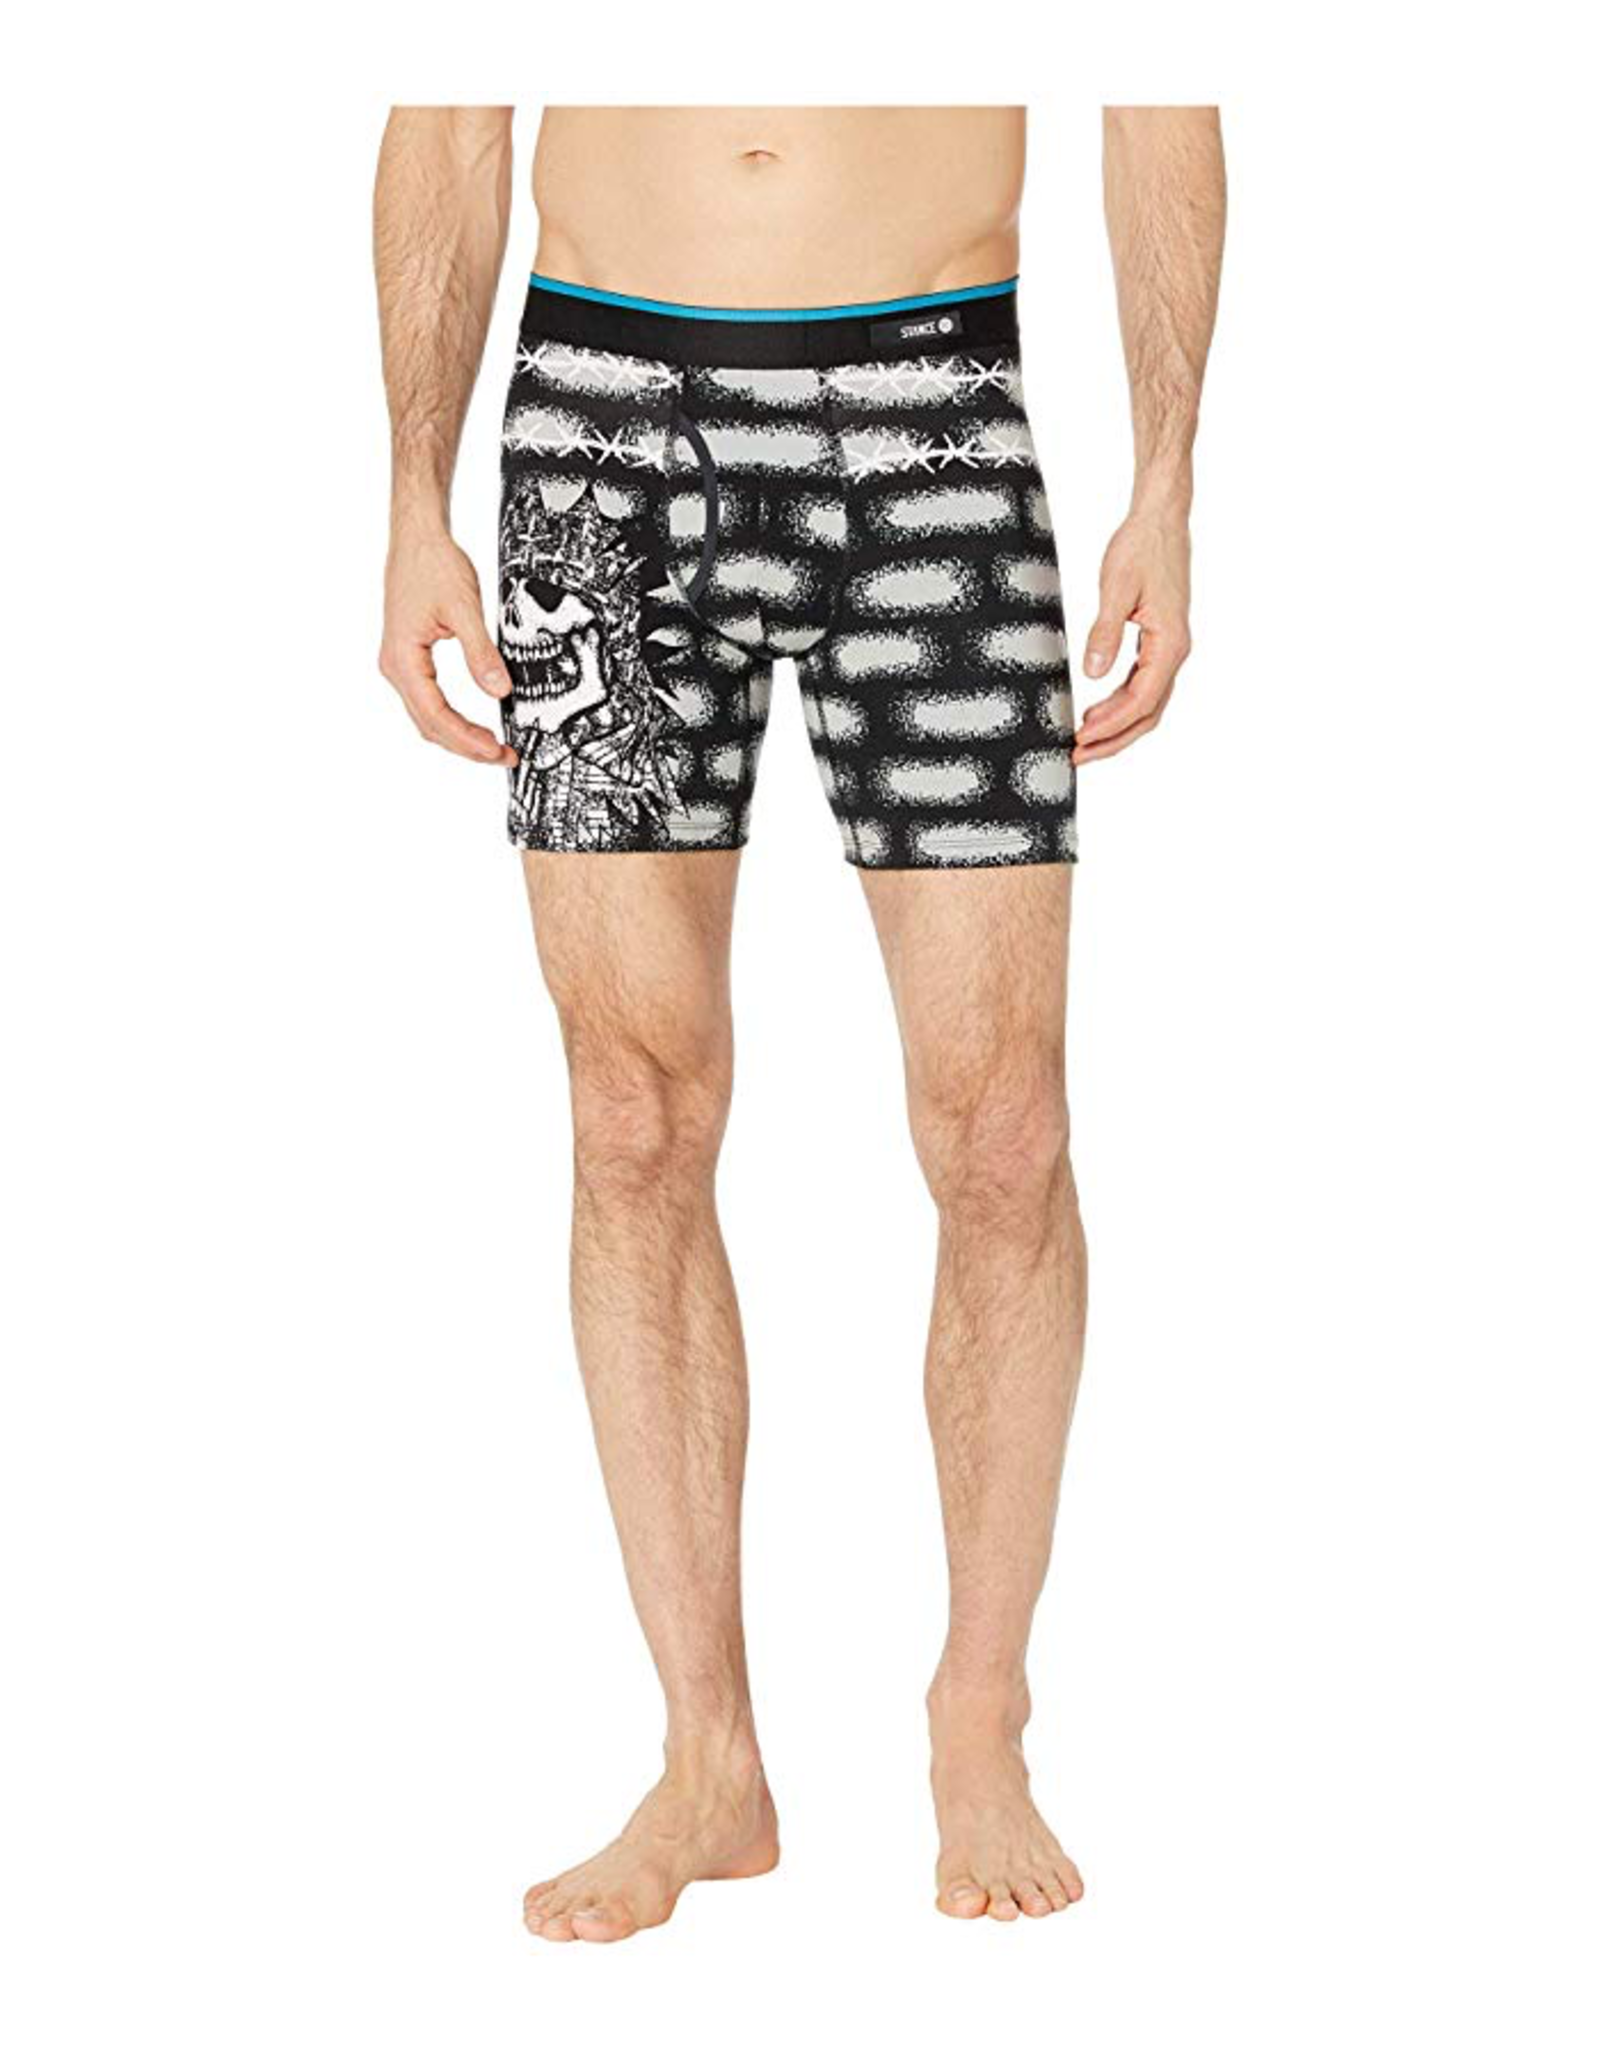 STANCE STANCE NO MERCY BOXER BRIEF - Salty's Board Shop